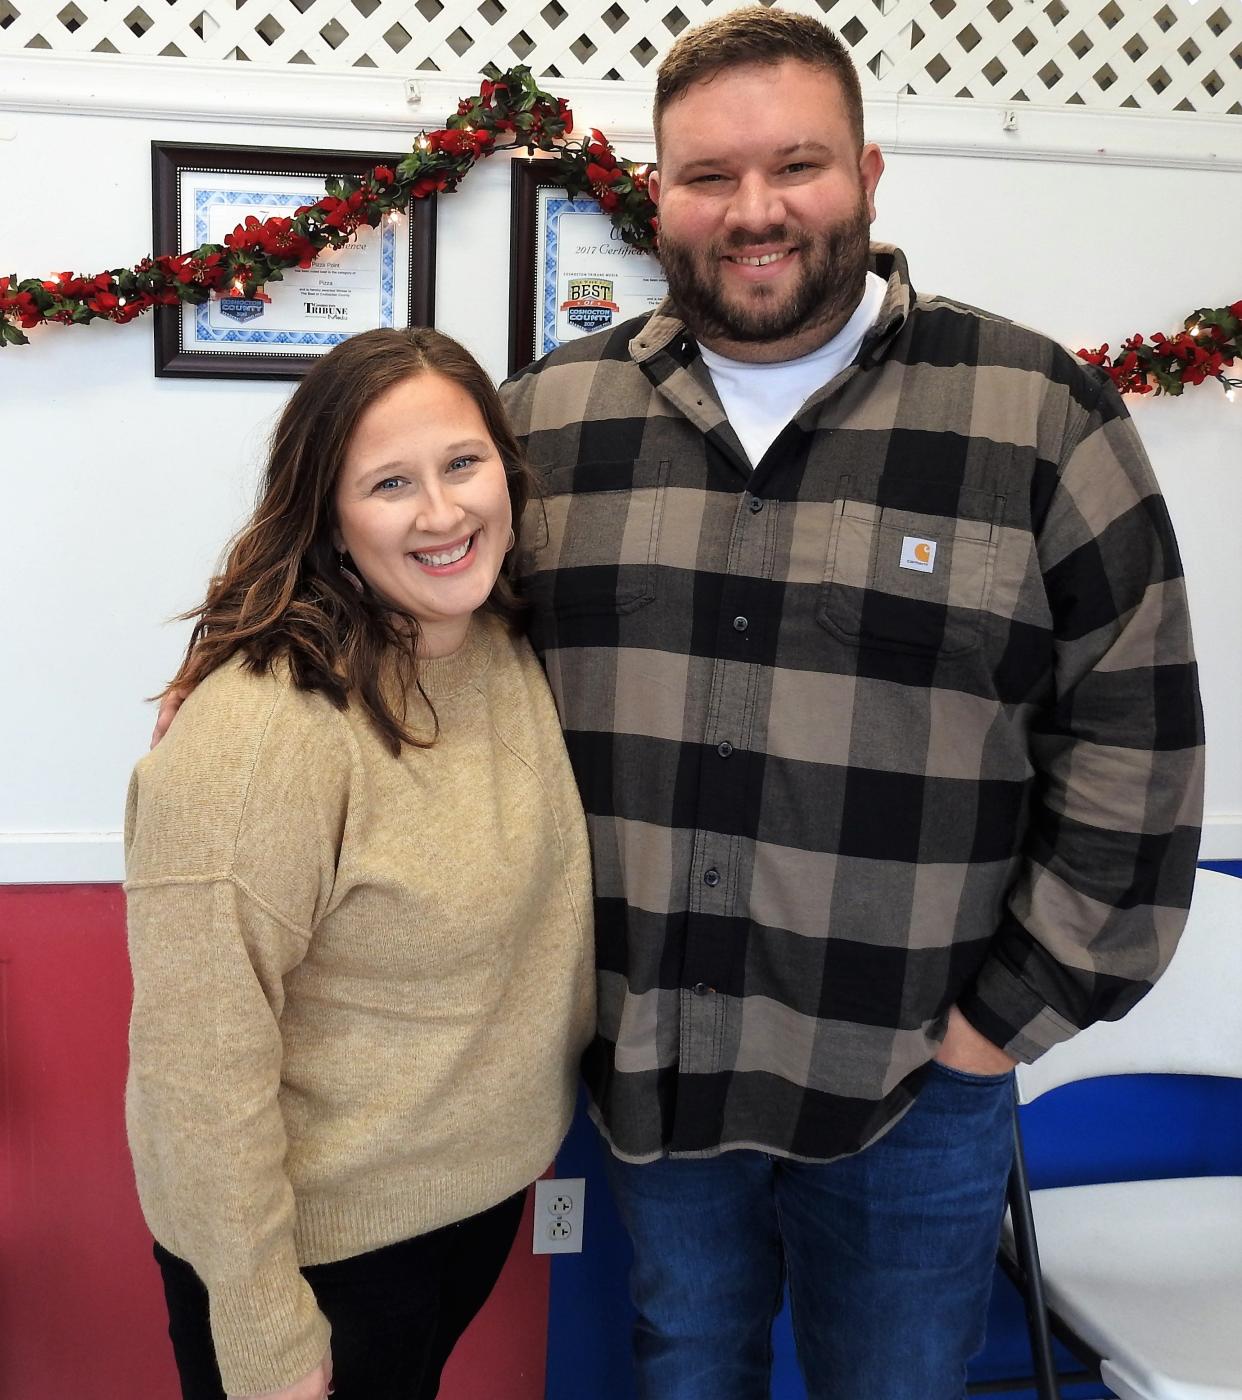 Kayla and Casey Davis recently took over Pizza Point from original owner Bob Blaho Jr. They plan to keep everything as it is now, including making dough and sauce fresh daily.